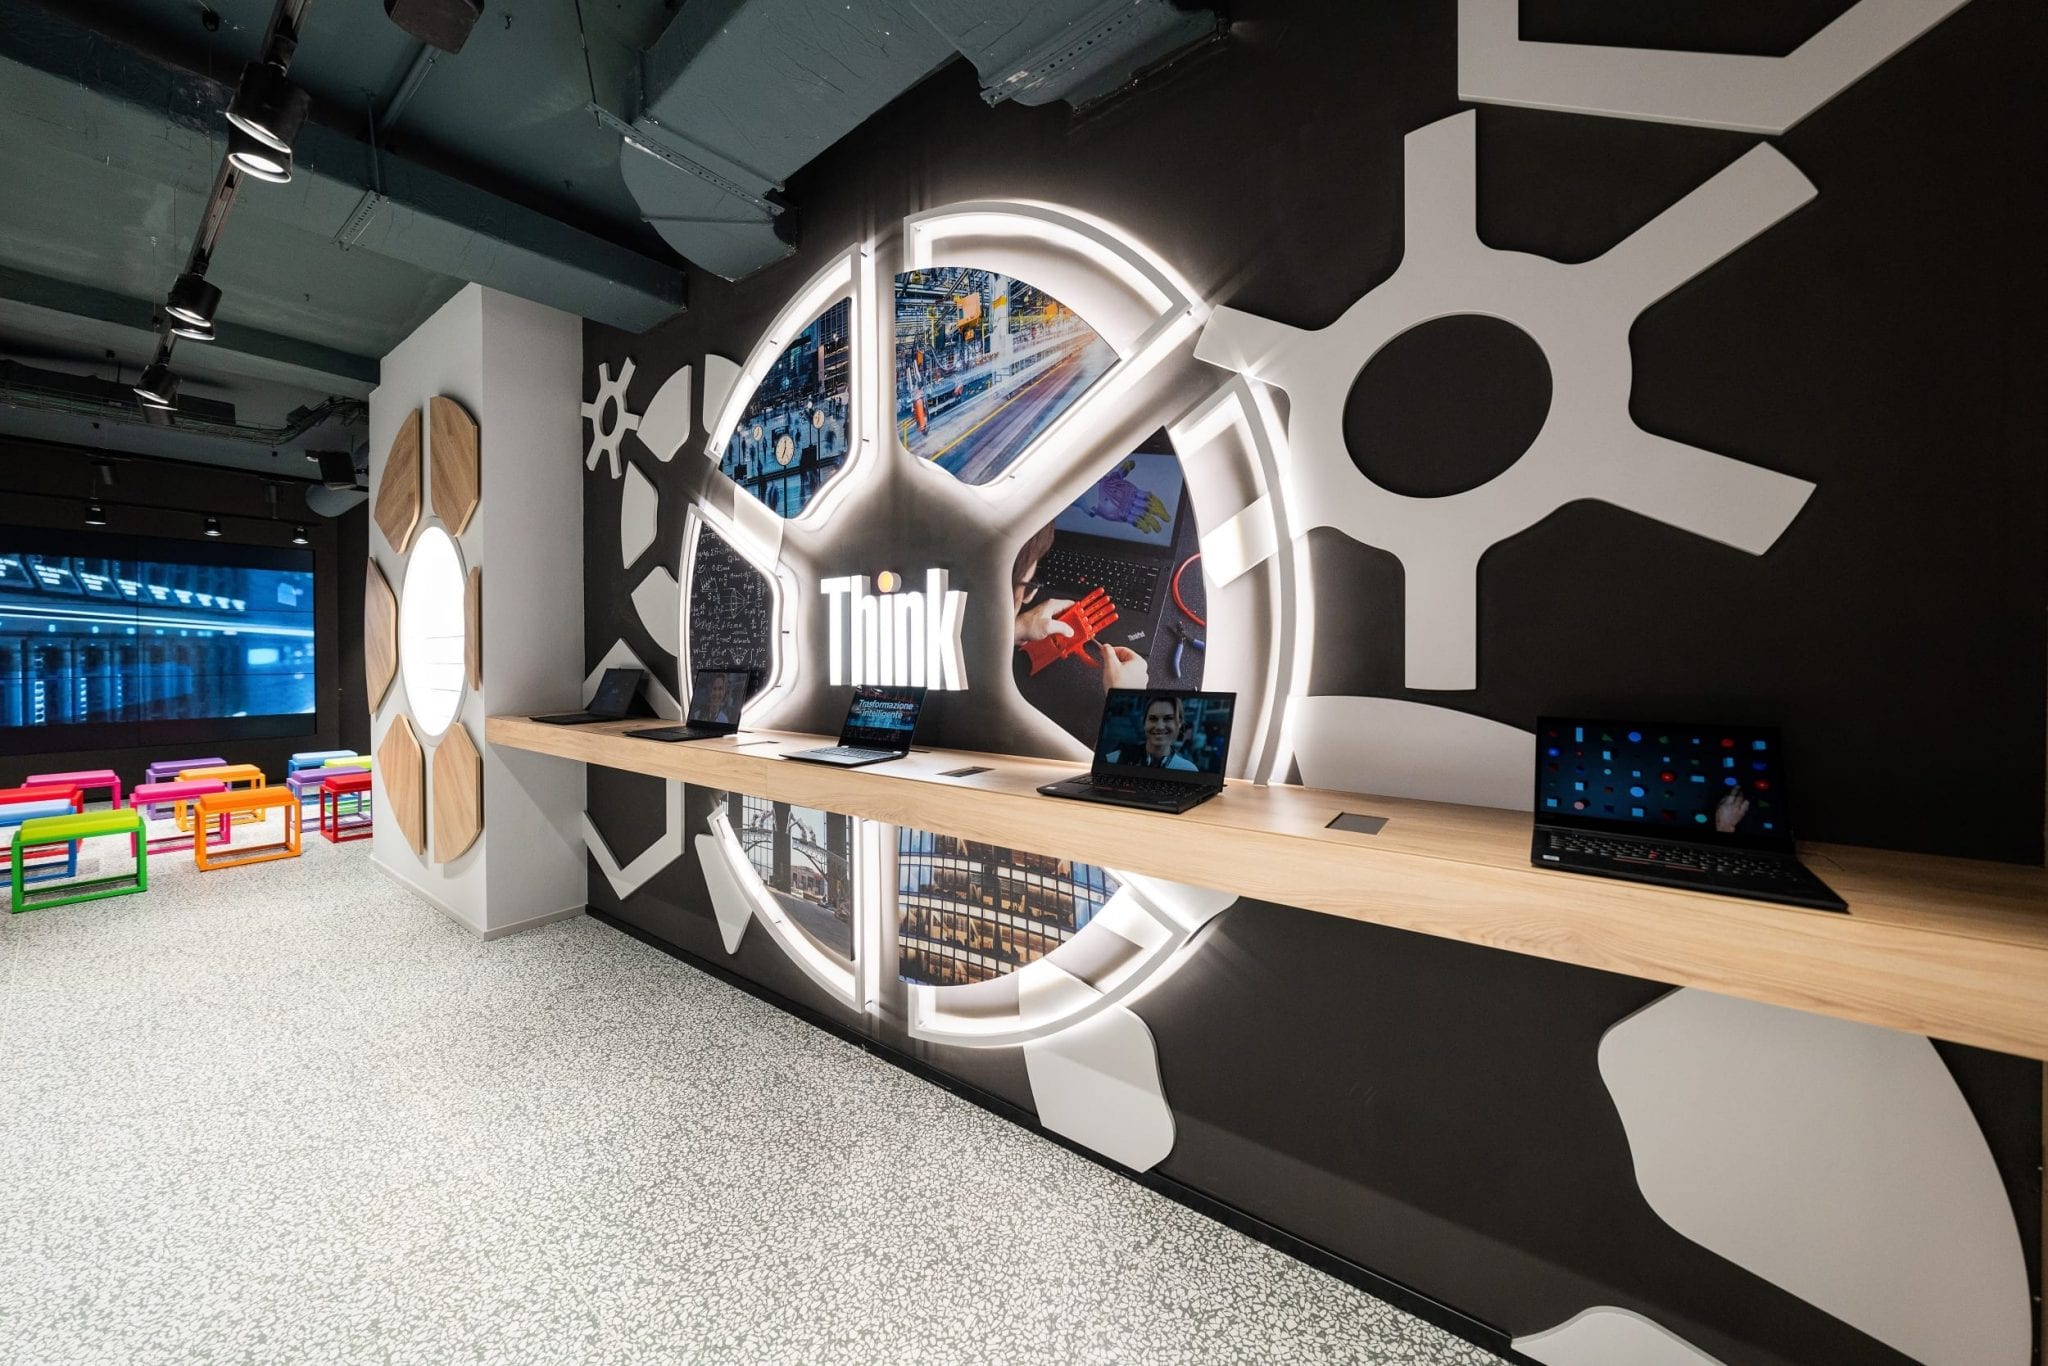 Spazio Lenovo concept store interior showing Think-branded devices and an open auditorium and workspace